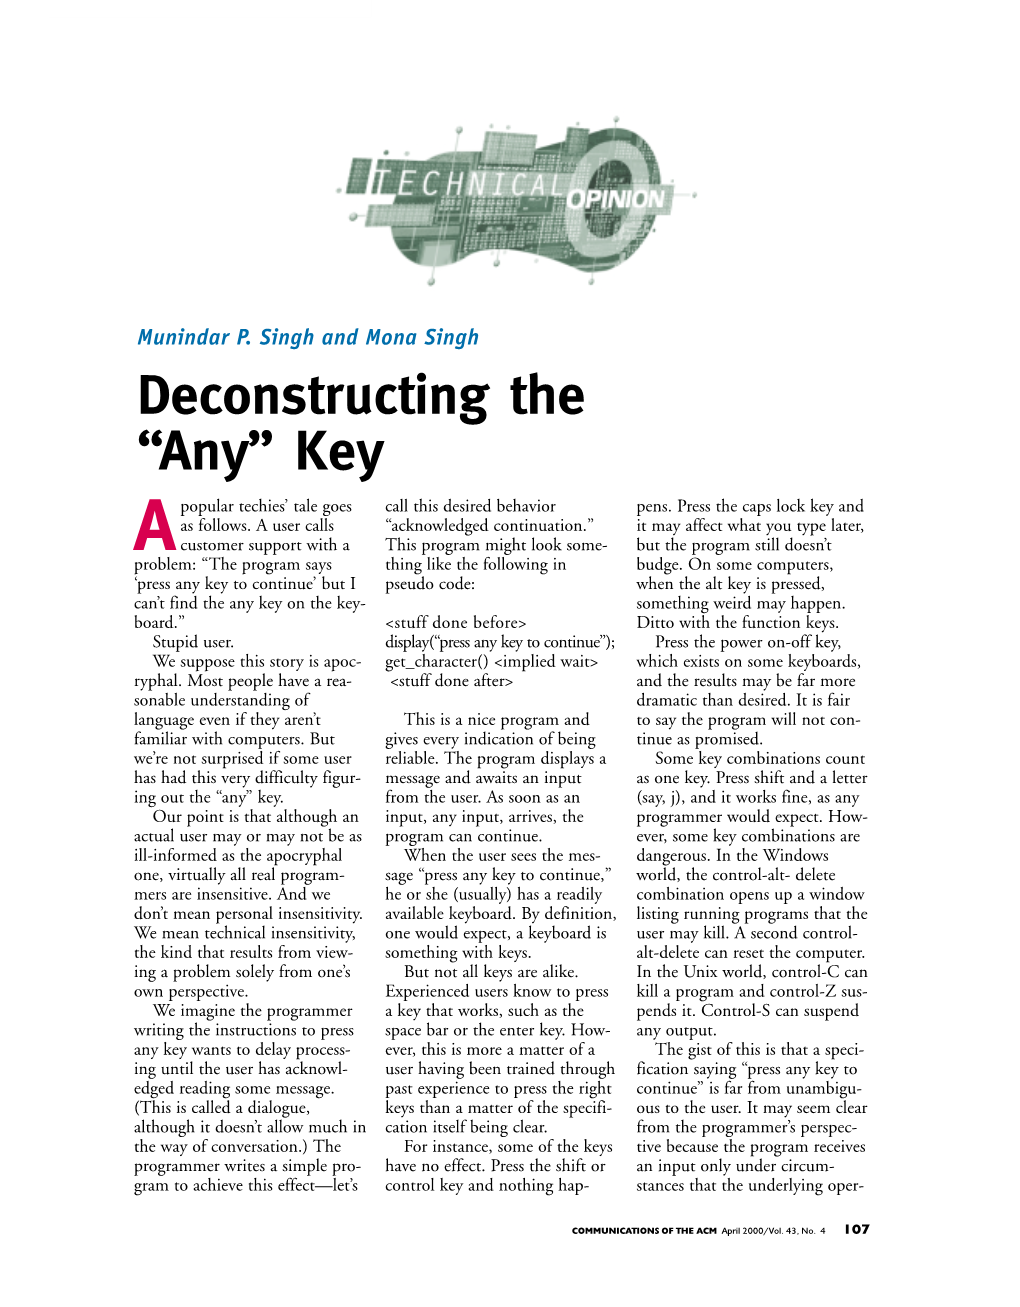 Deconstructing the “Any” Key Popular Techies’ Tale Goes Call This Desired Behavior Pens